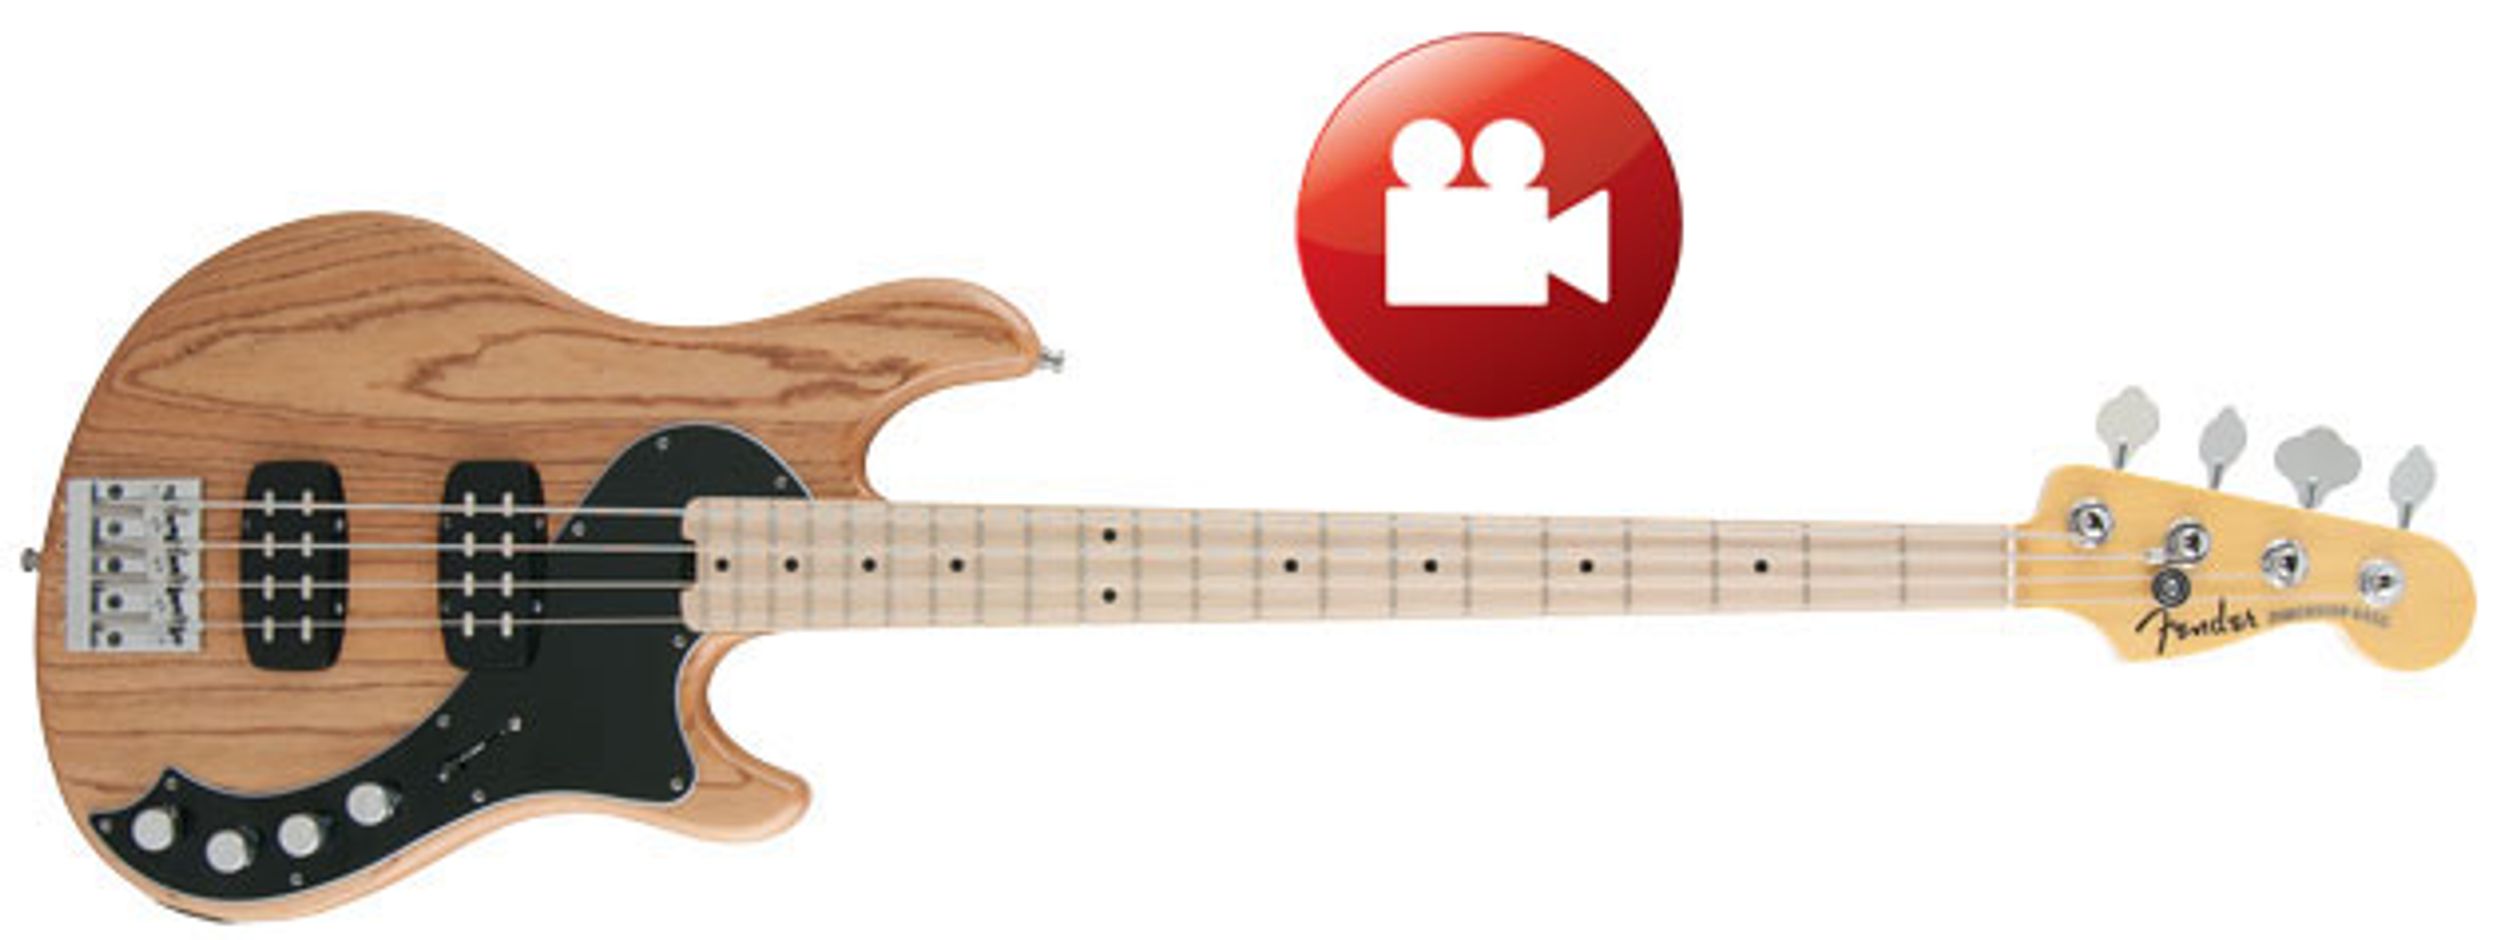 Fender Dimension Bass Review